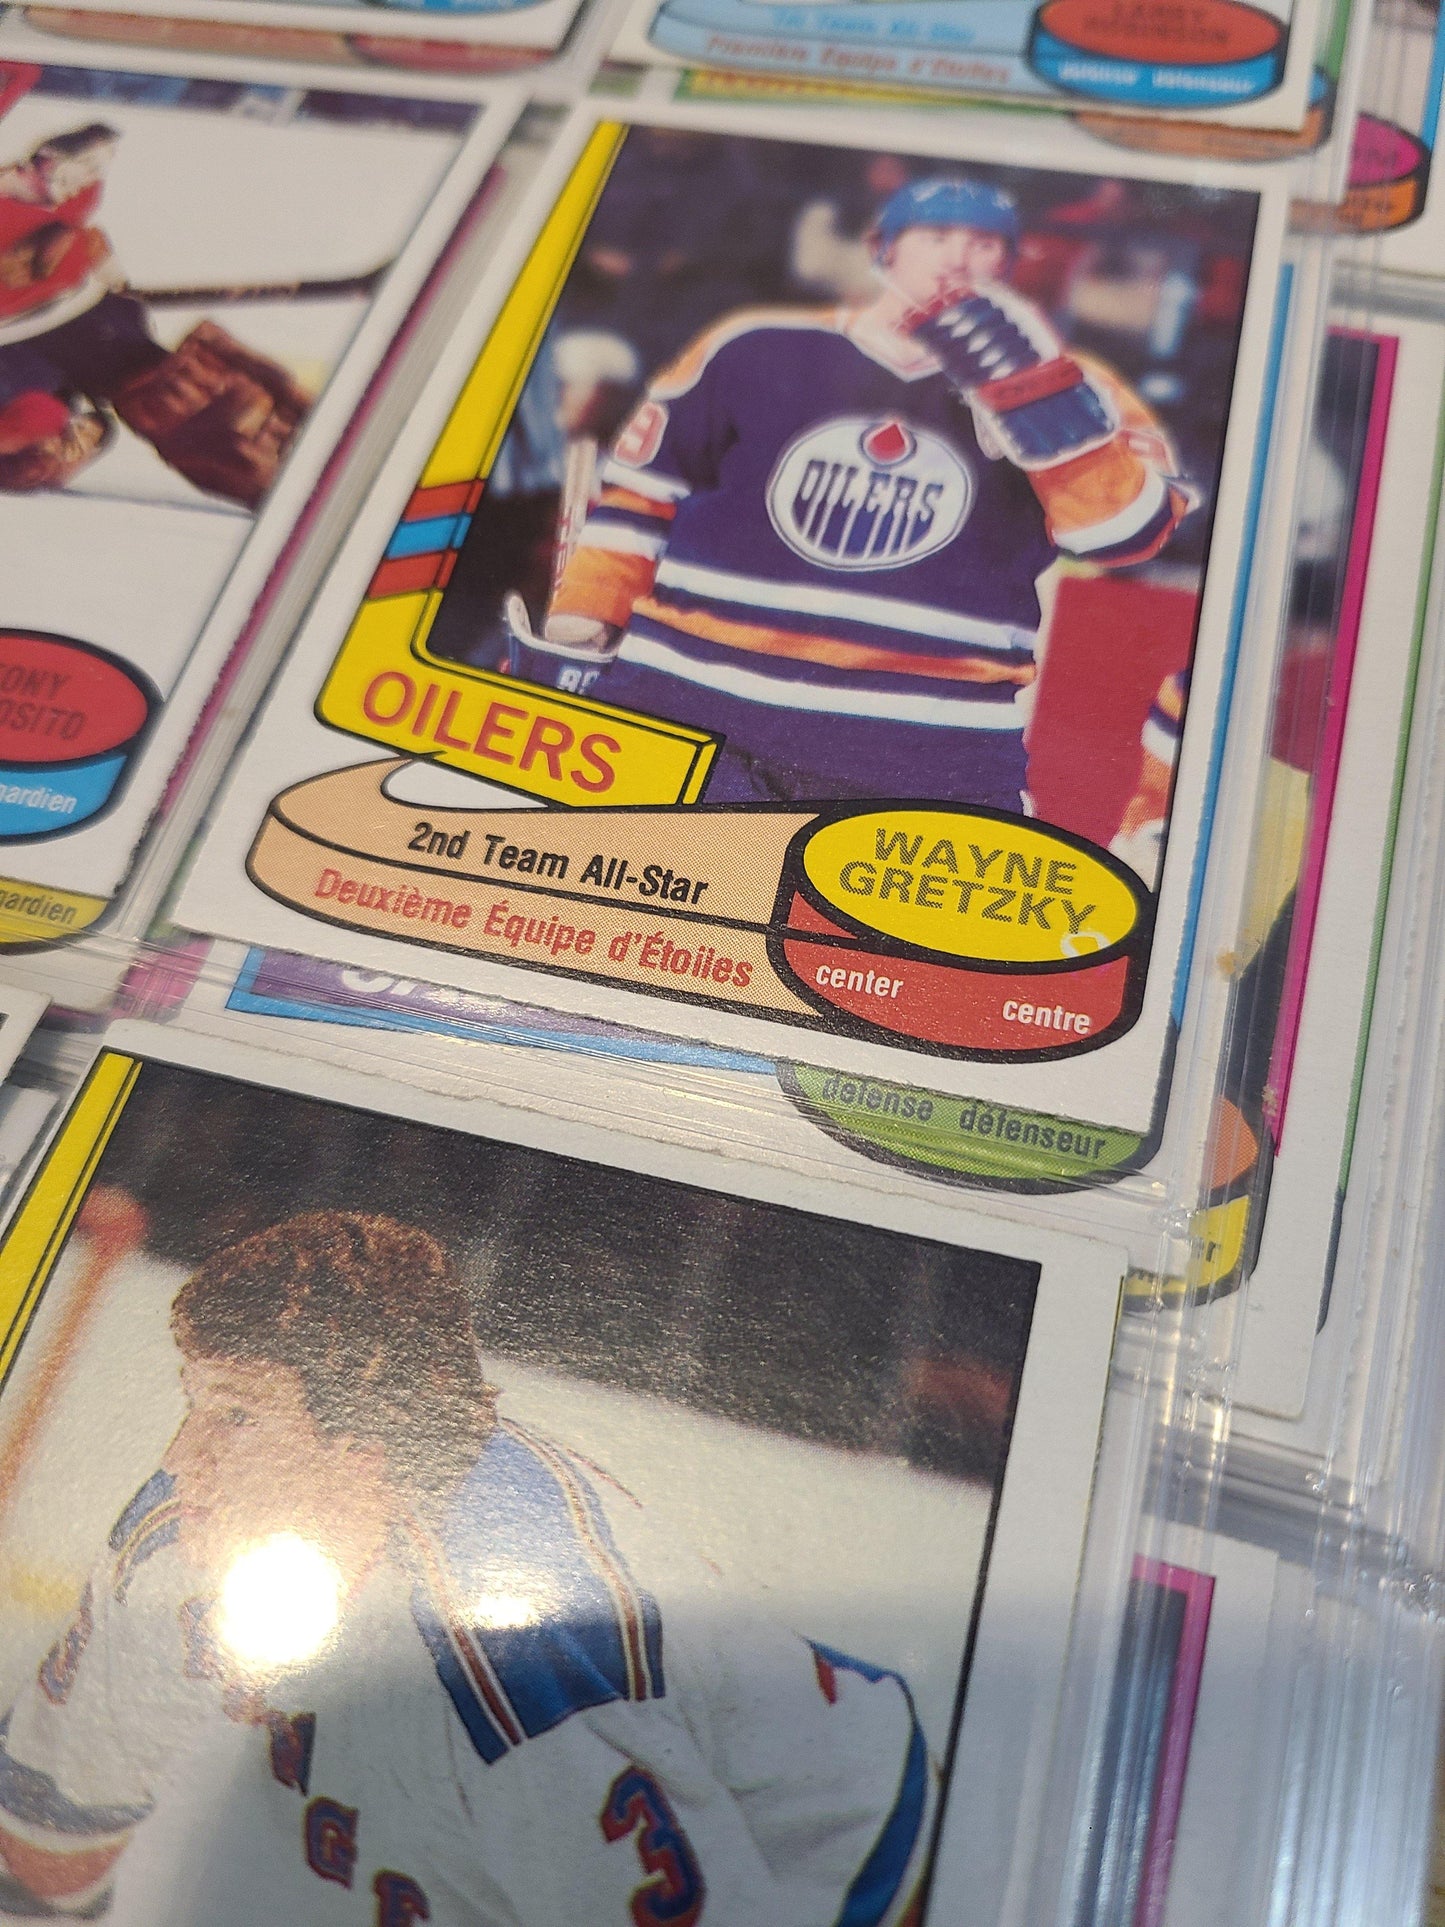 1980/81 O-Pee-Chee Hockey Card Complete Set (396 Cards) - FLIP Collectibles Shop